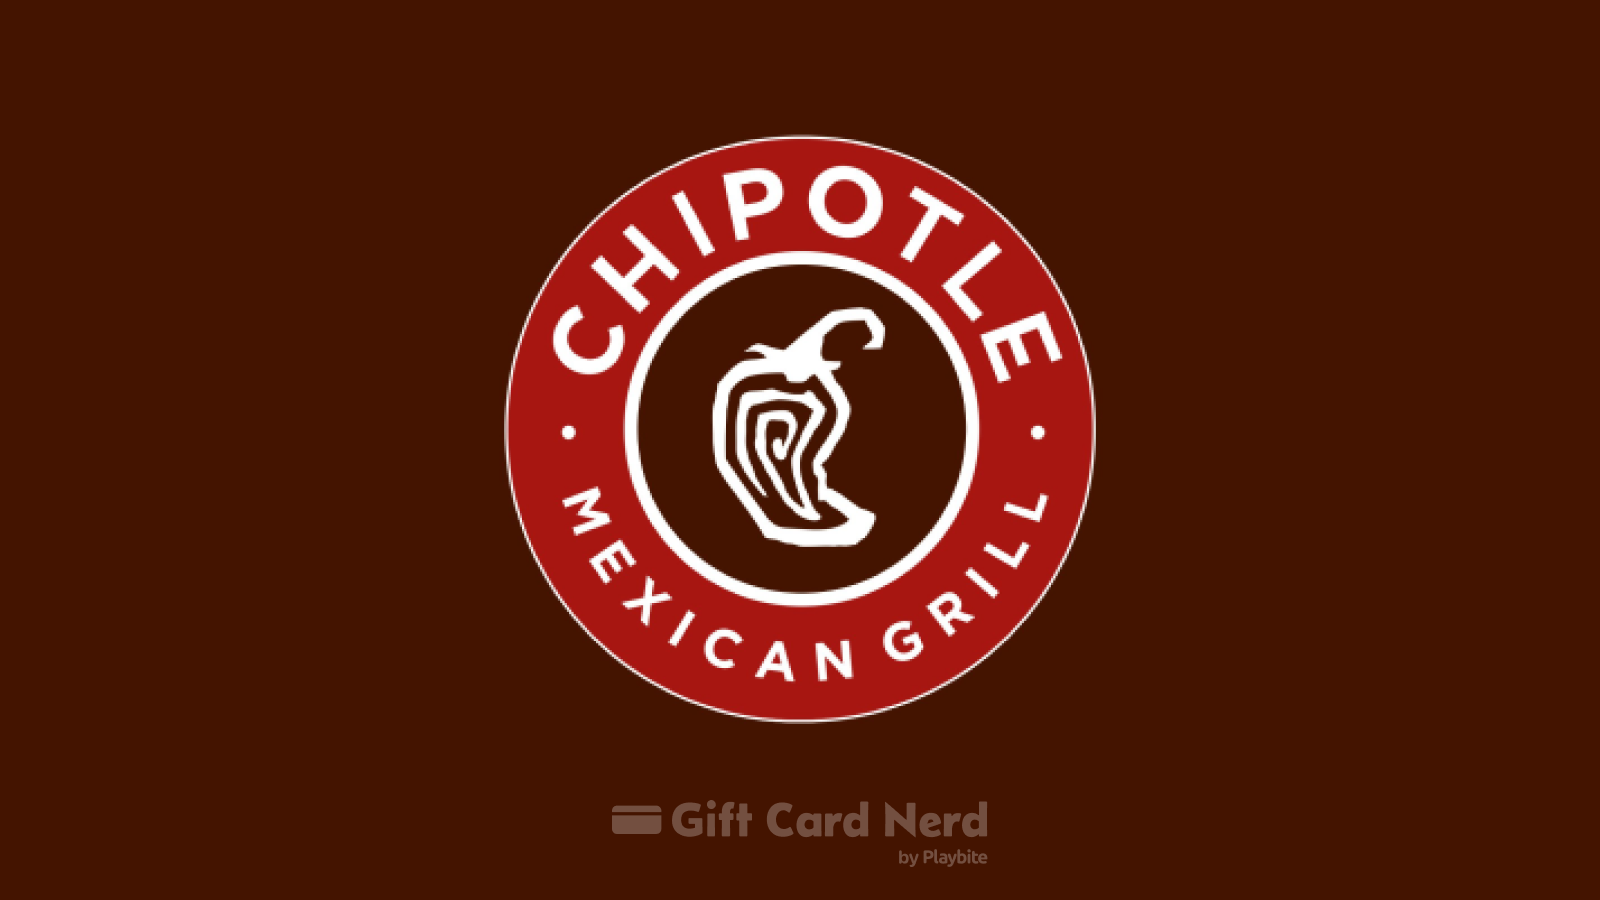 Does Walgreens Sell Chipotle Gift Cards?